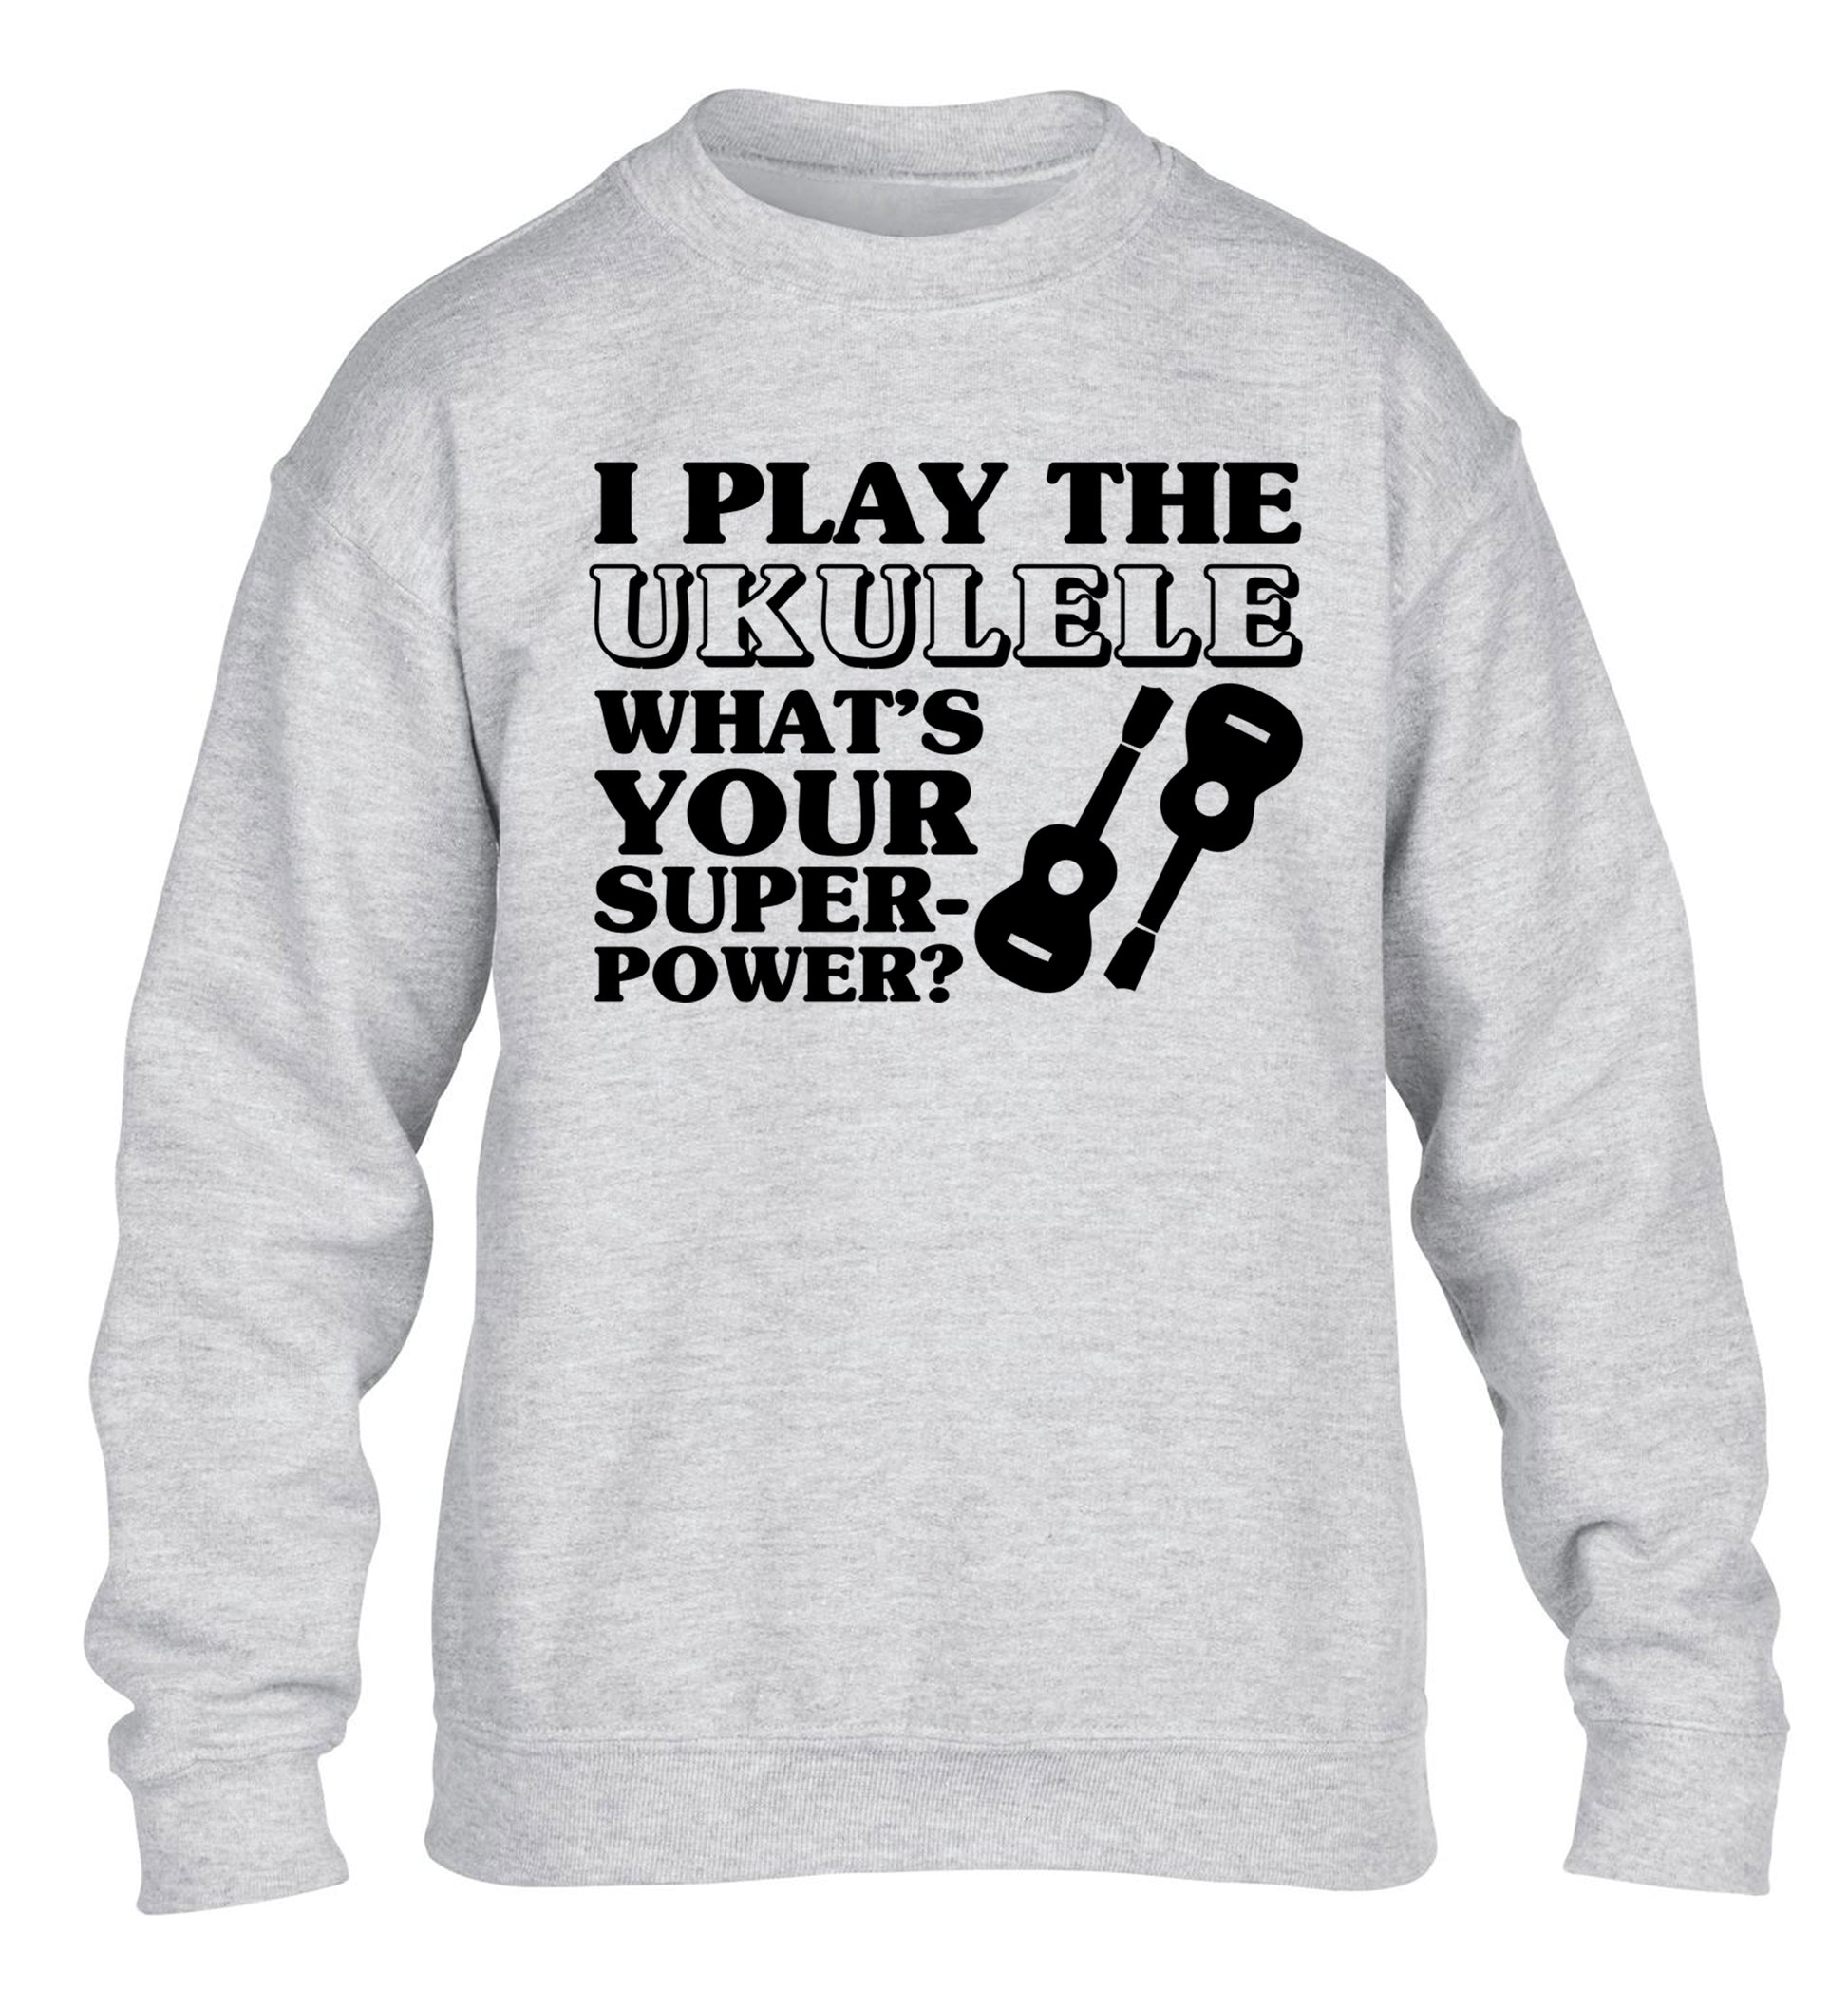 I play the ukulele what's your superpower? children's grey sweater 12-14 Years